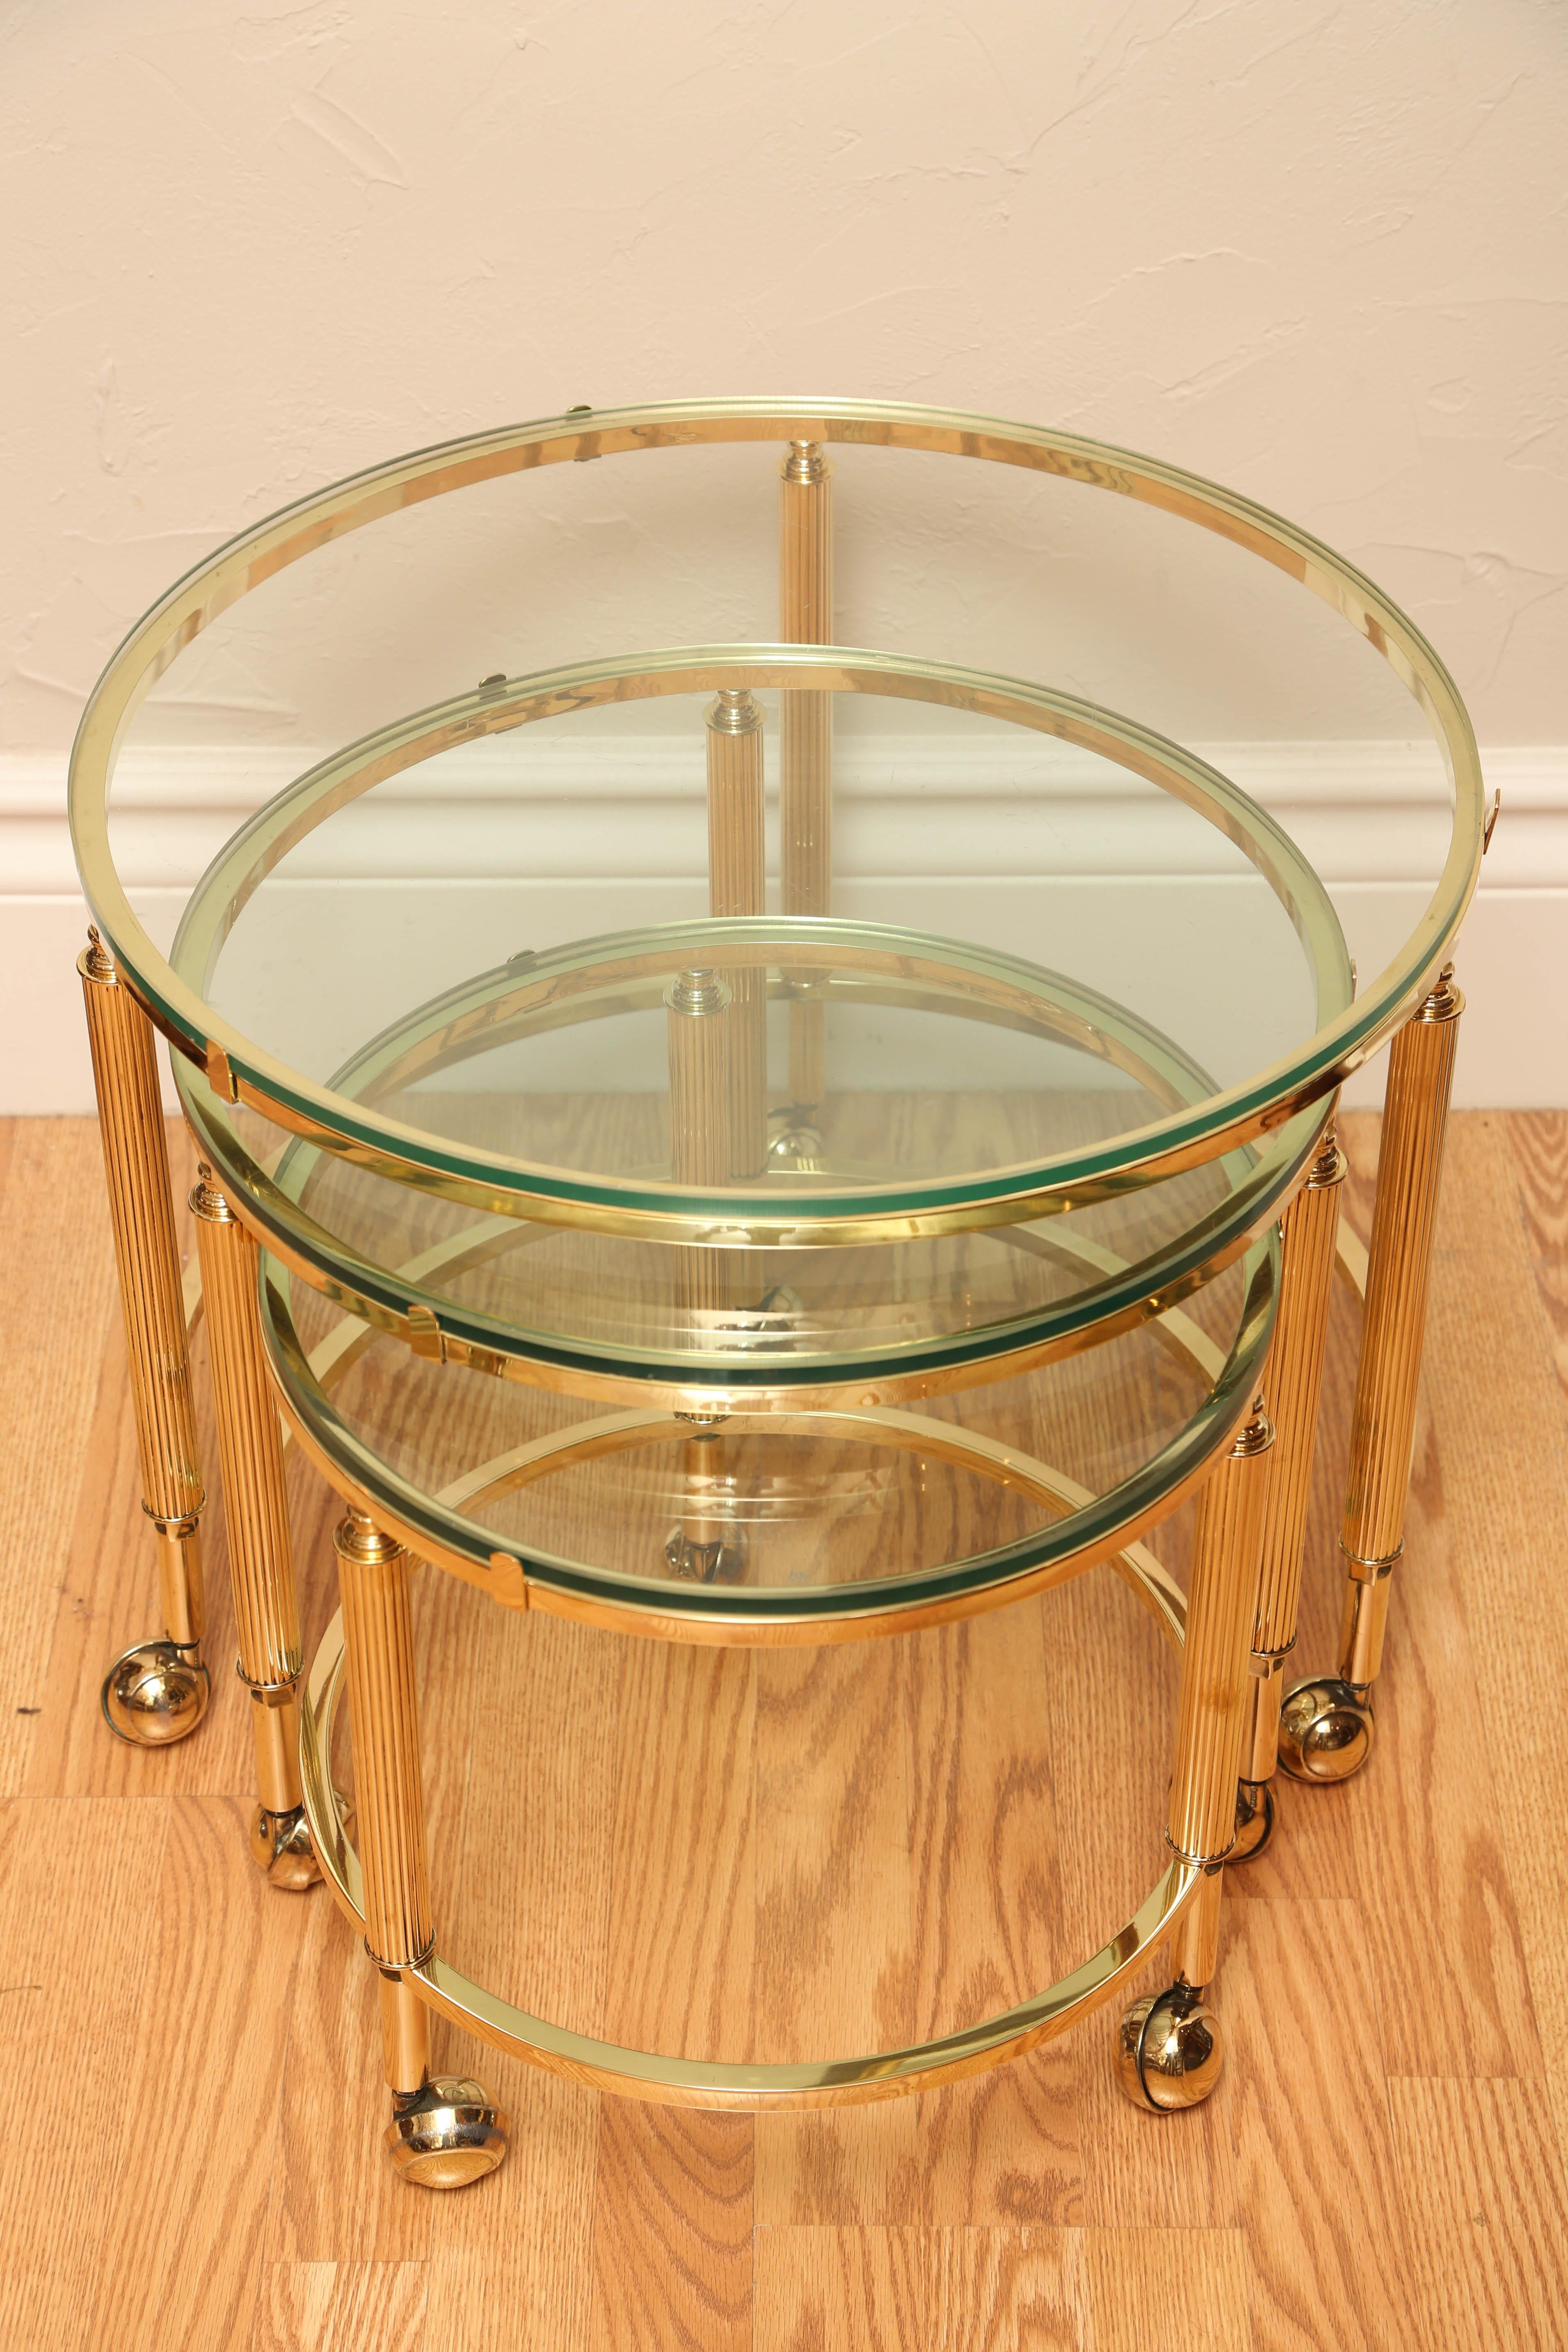 Mid-Century Modern round brass stacking tables with fluted legs, original brass castors and glass tops.